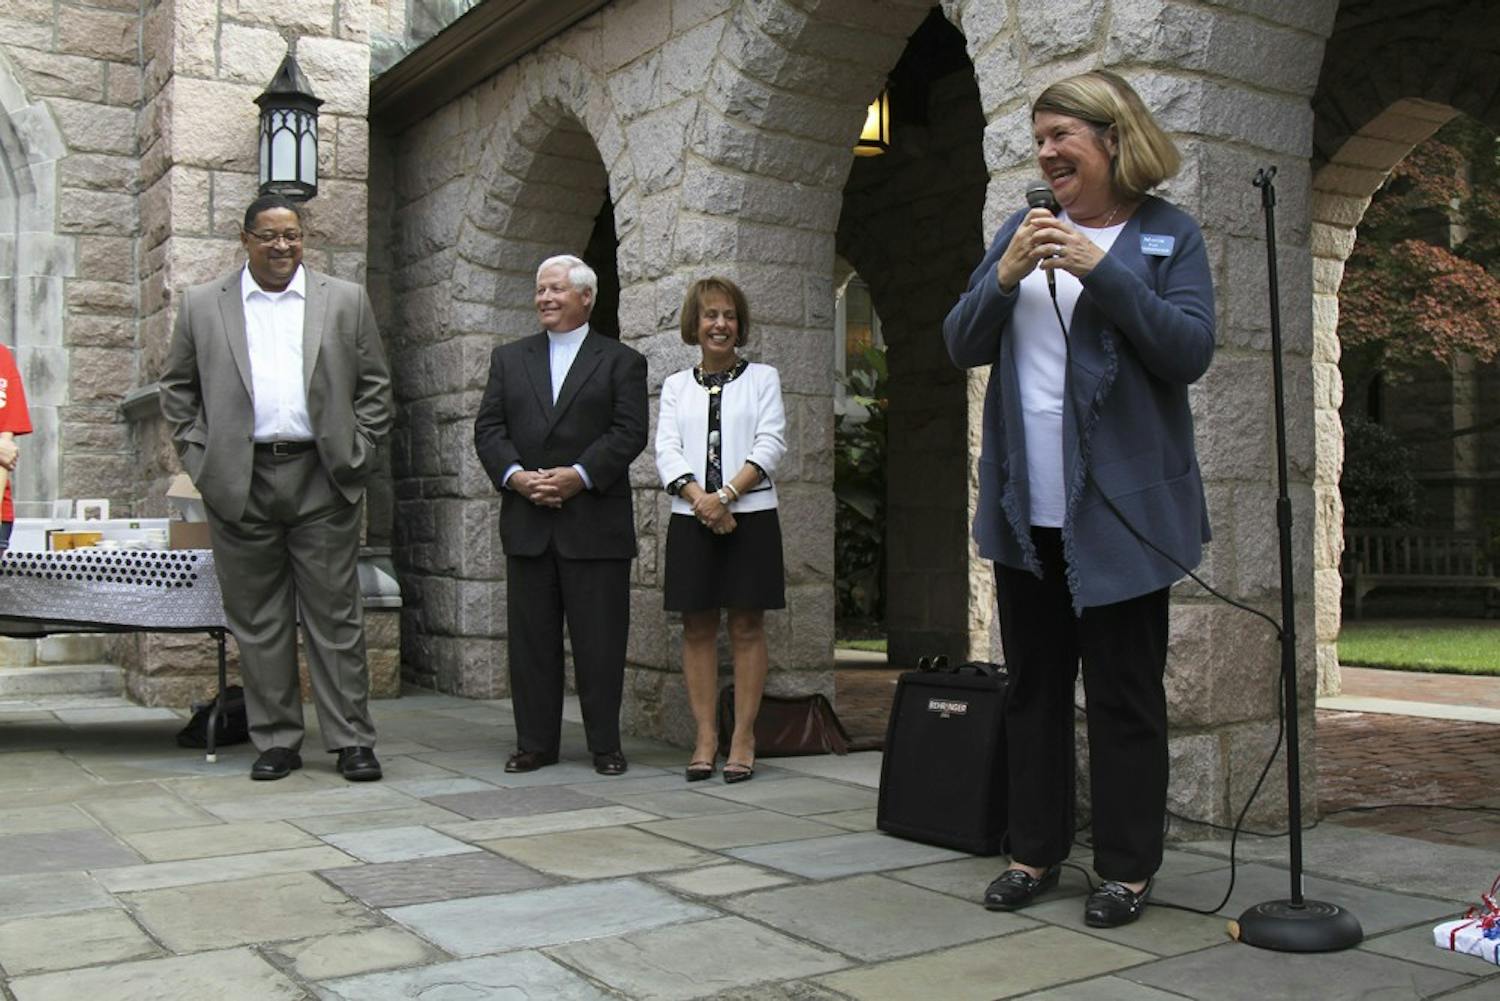 Chapel Hill Mayor Pam Hemminger (right) made statements at the Chapel of the Cross before she casted her vote Thursday.